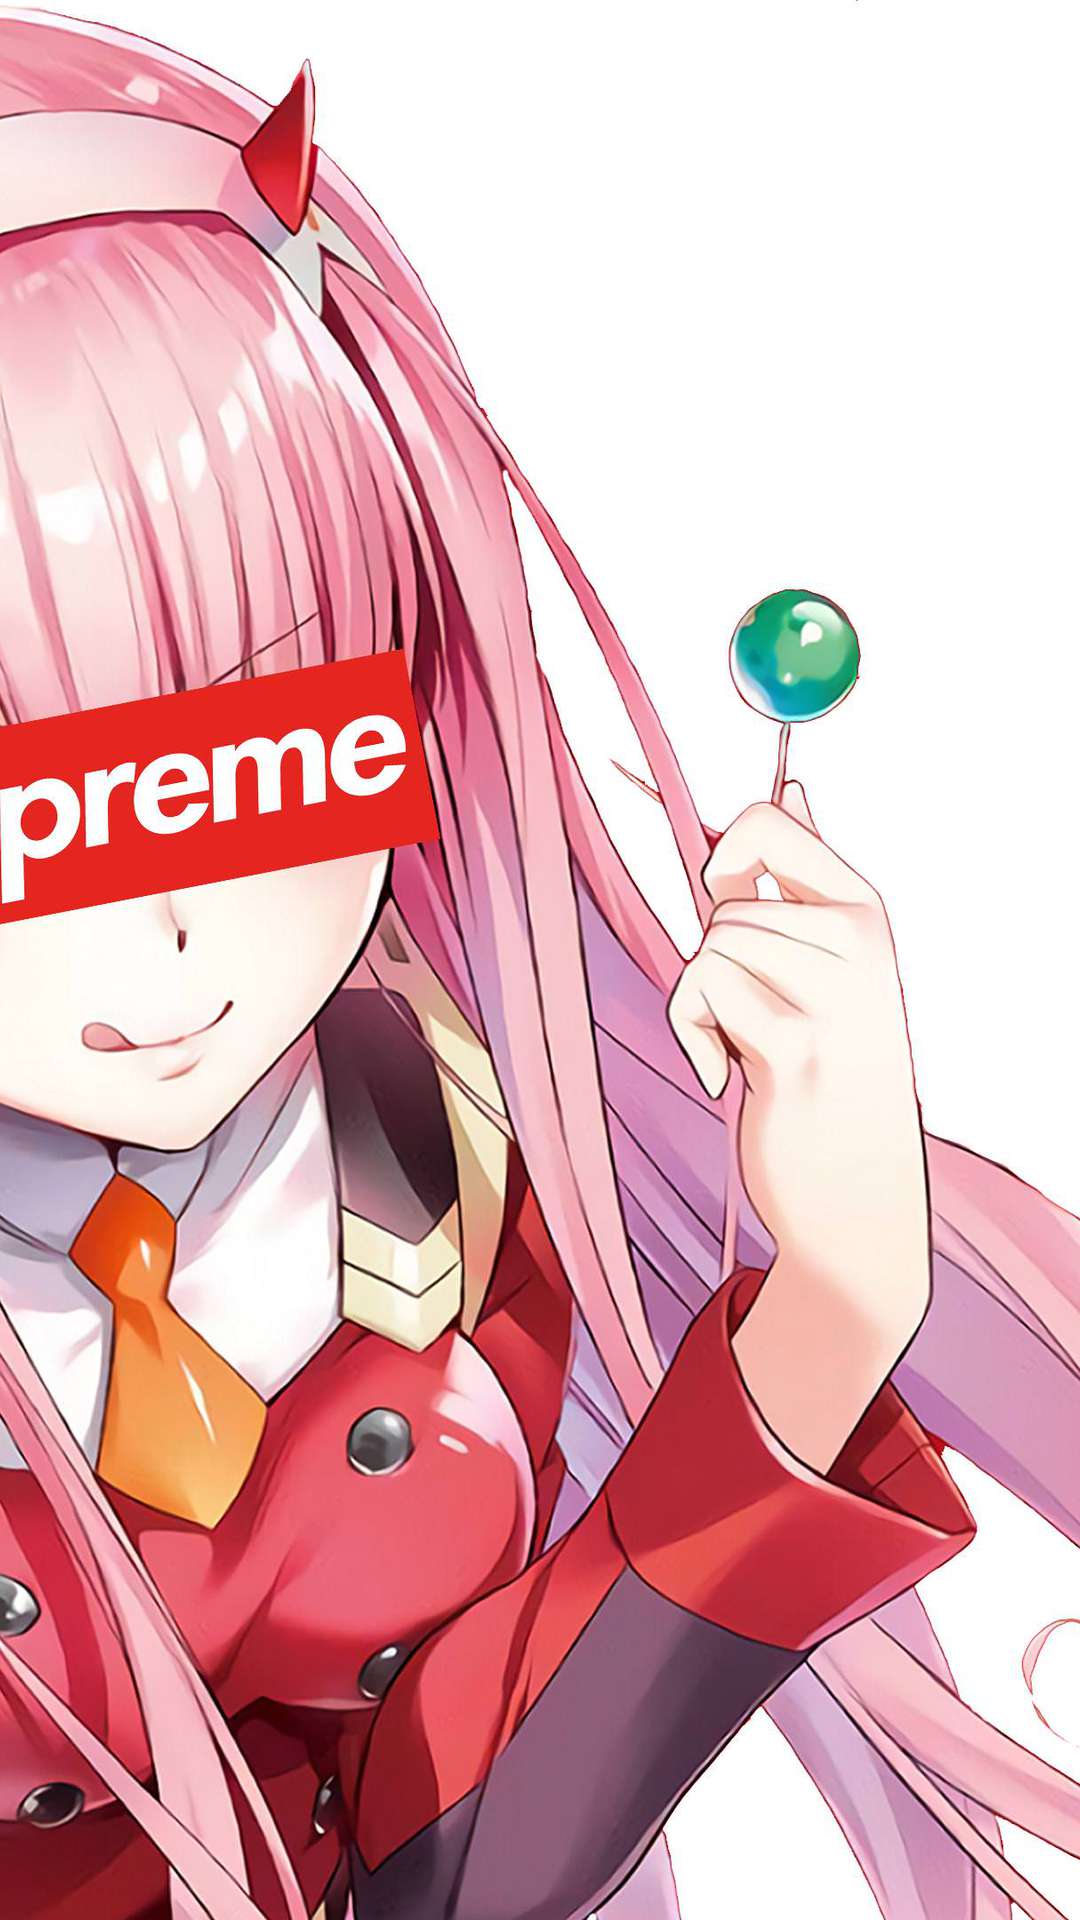 28 Supreme Anime Wallpapers for iPhone and Android by Jordan Chan